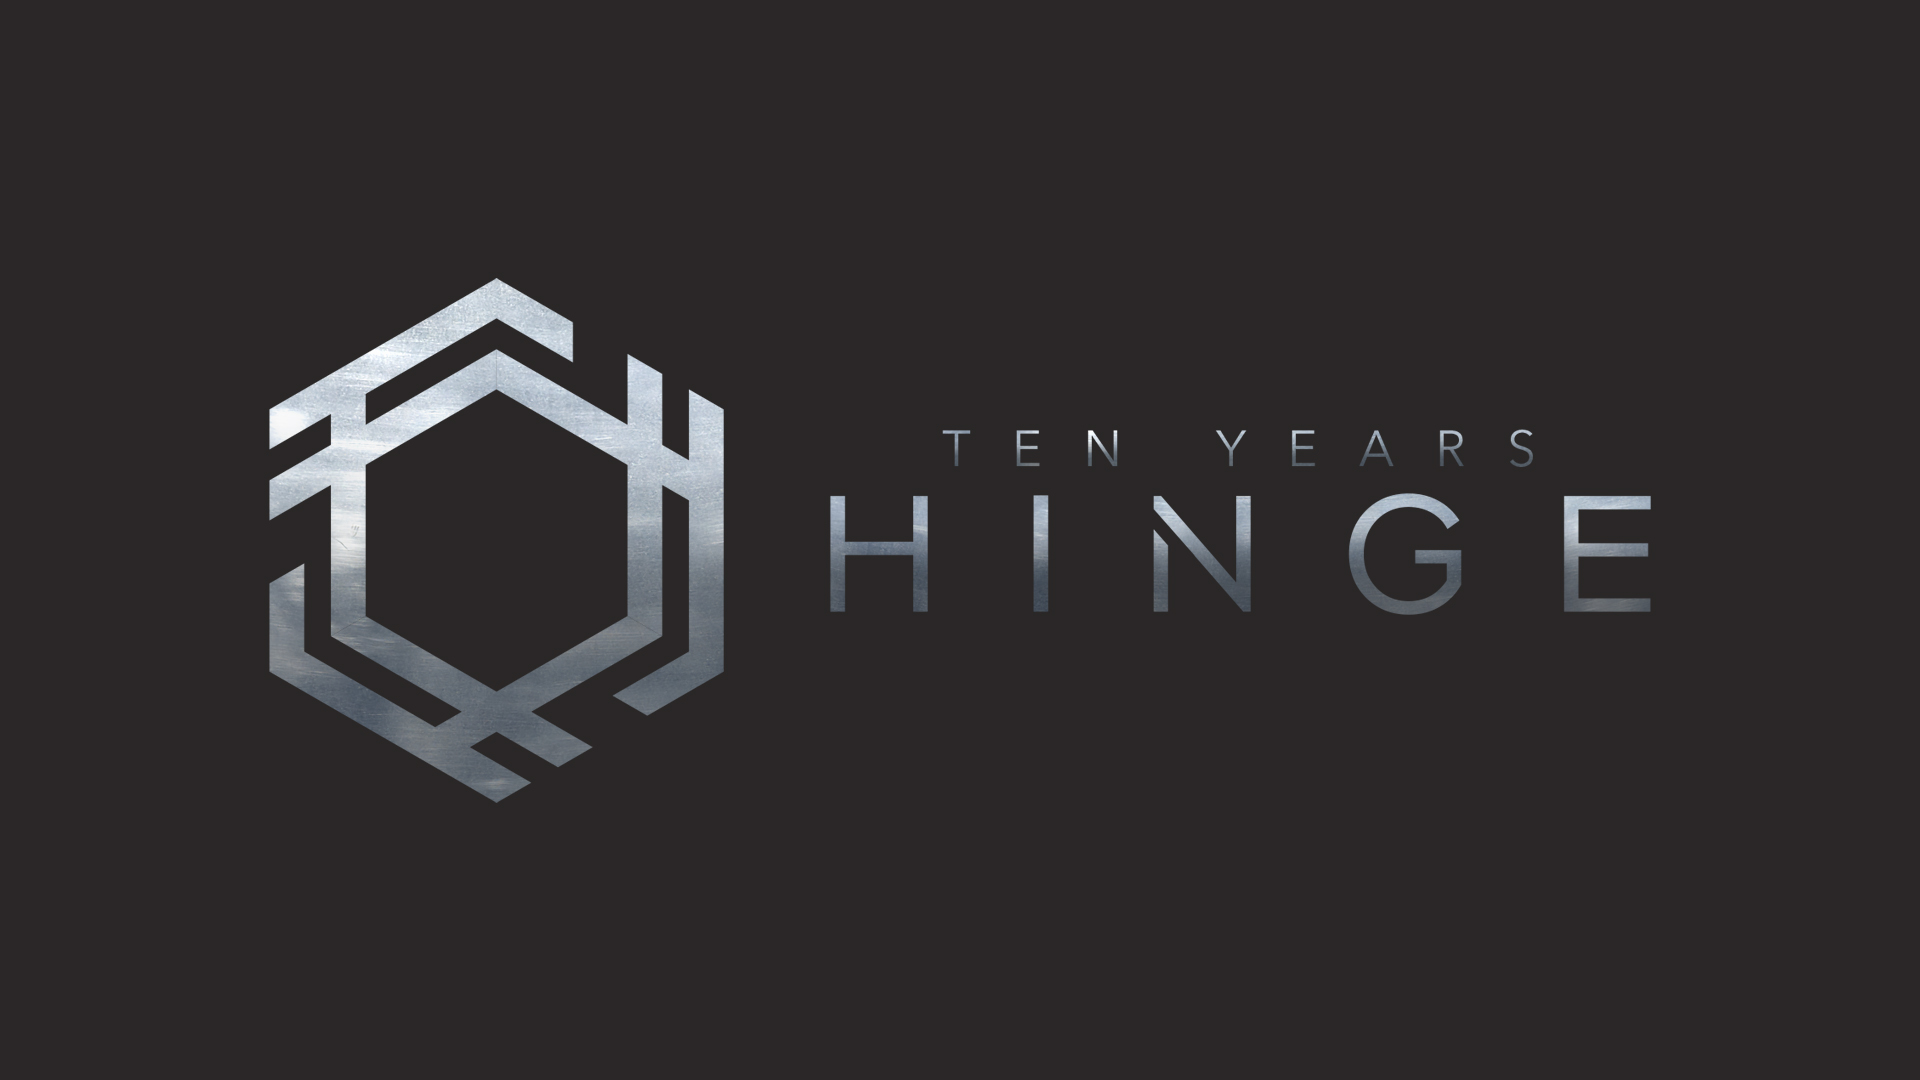 A look at Hinge over the past 10 years